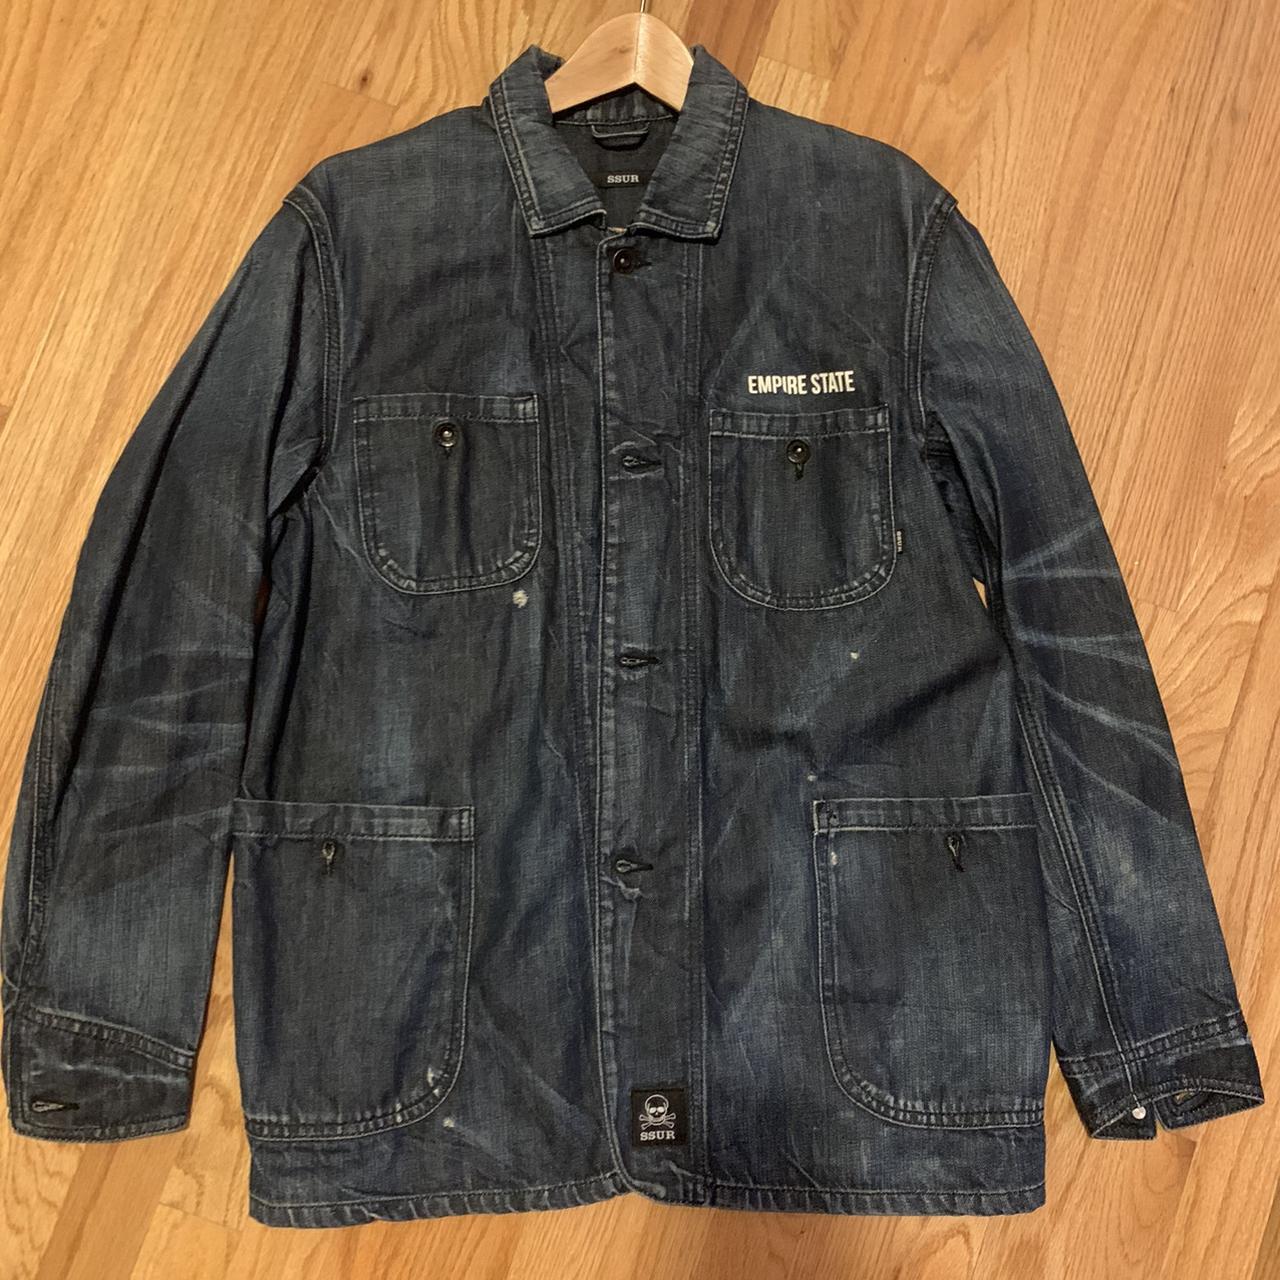 SSUR Jail Jacket. Retail $200 like new condition